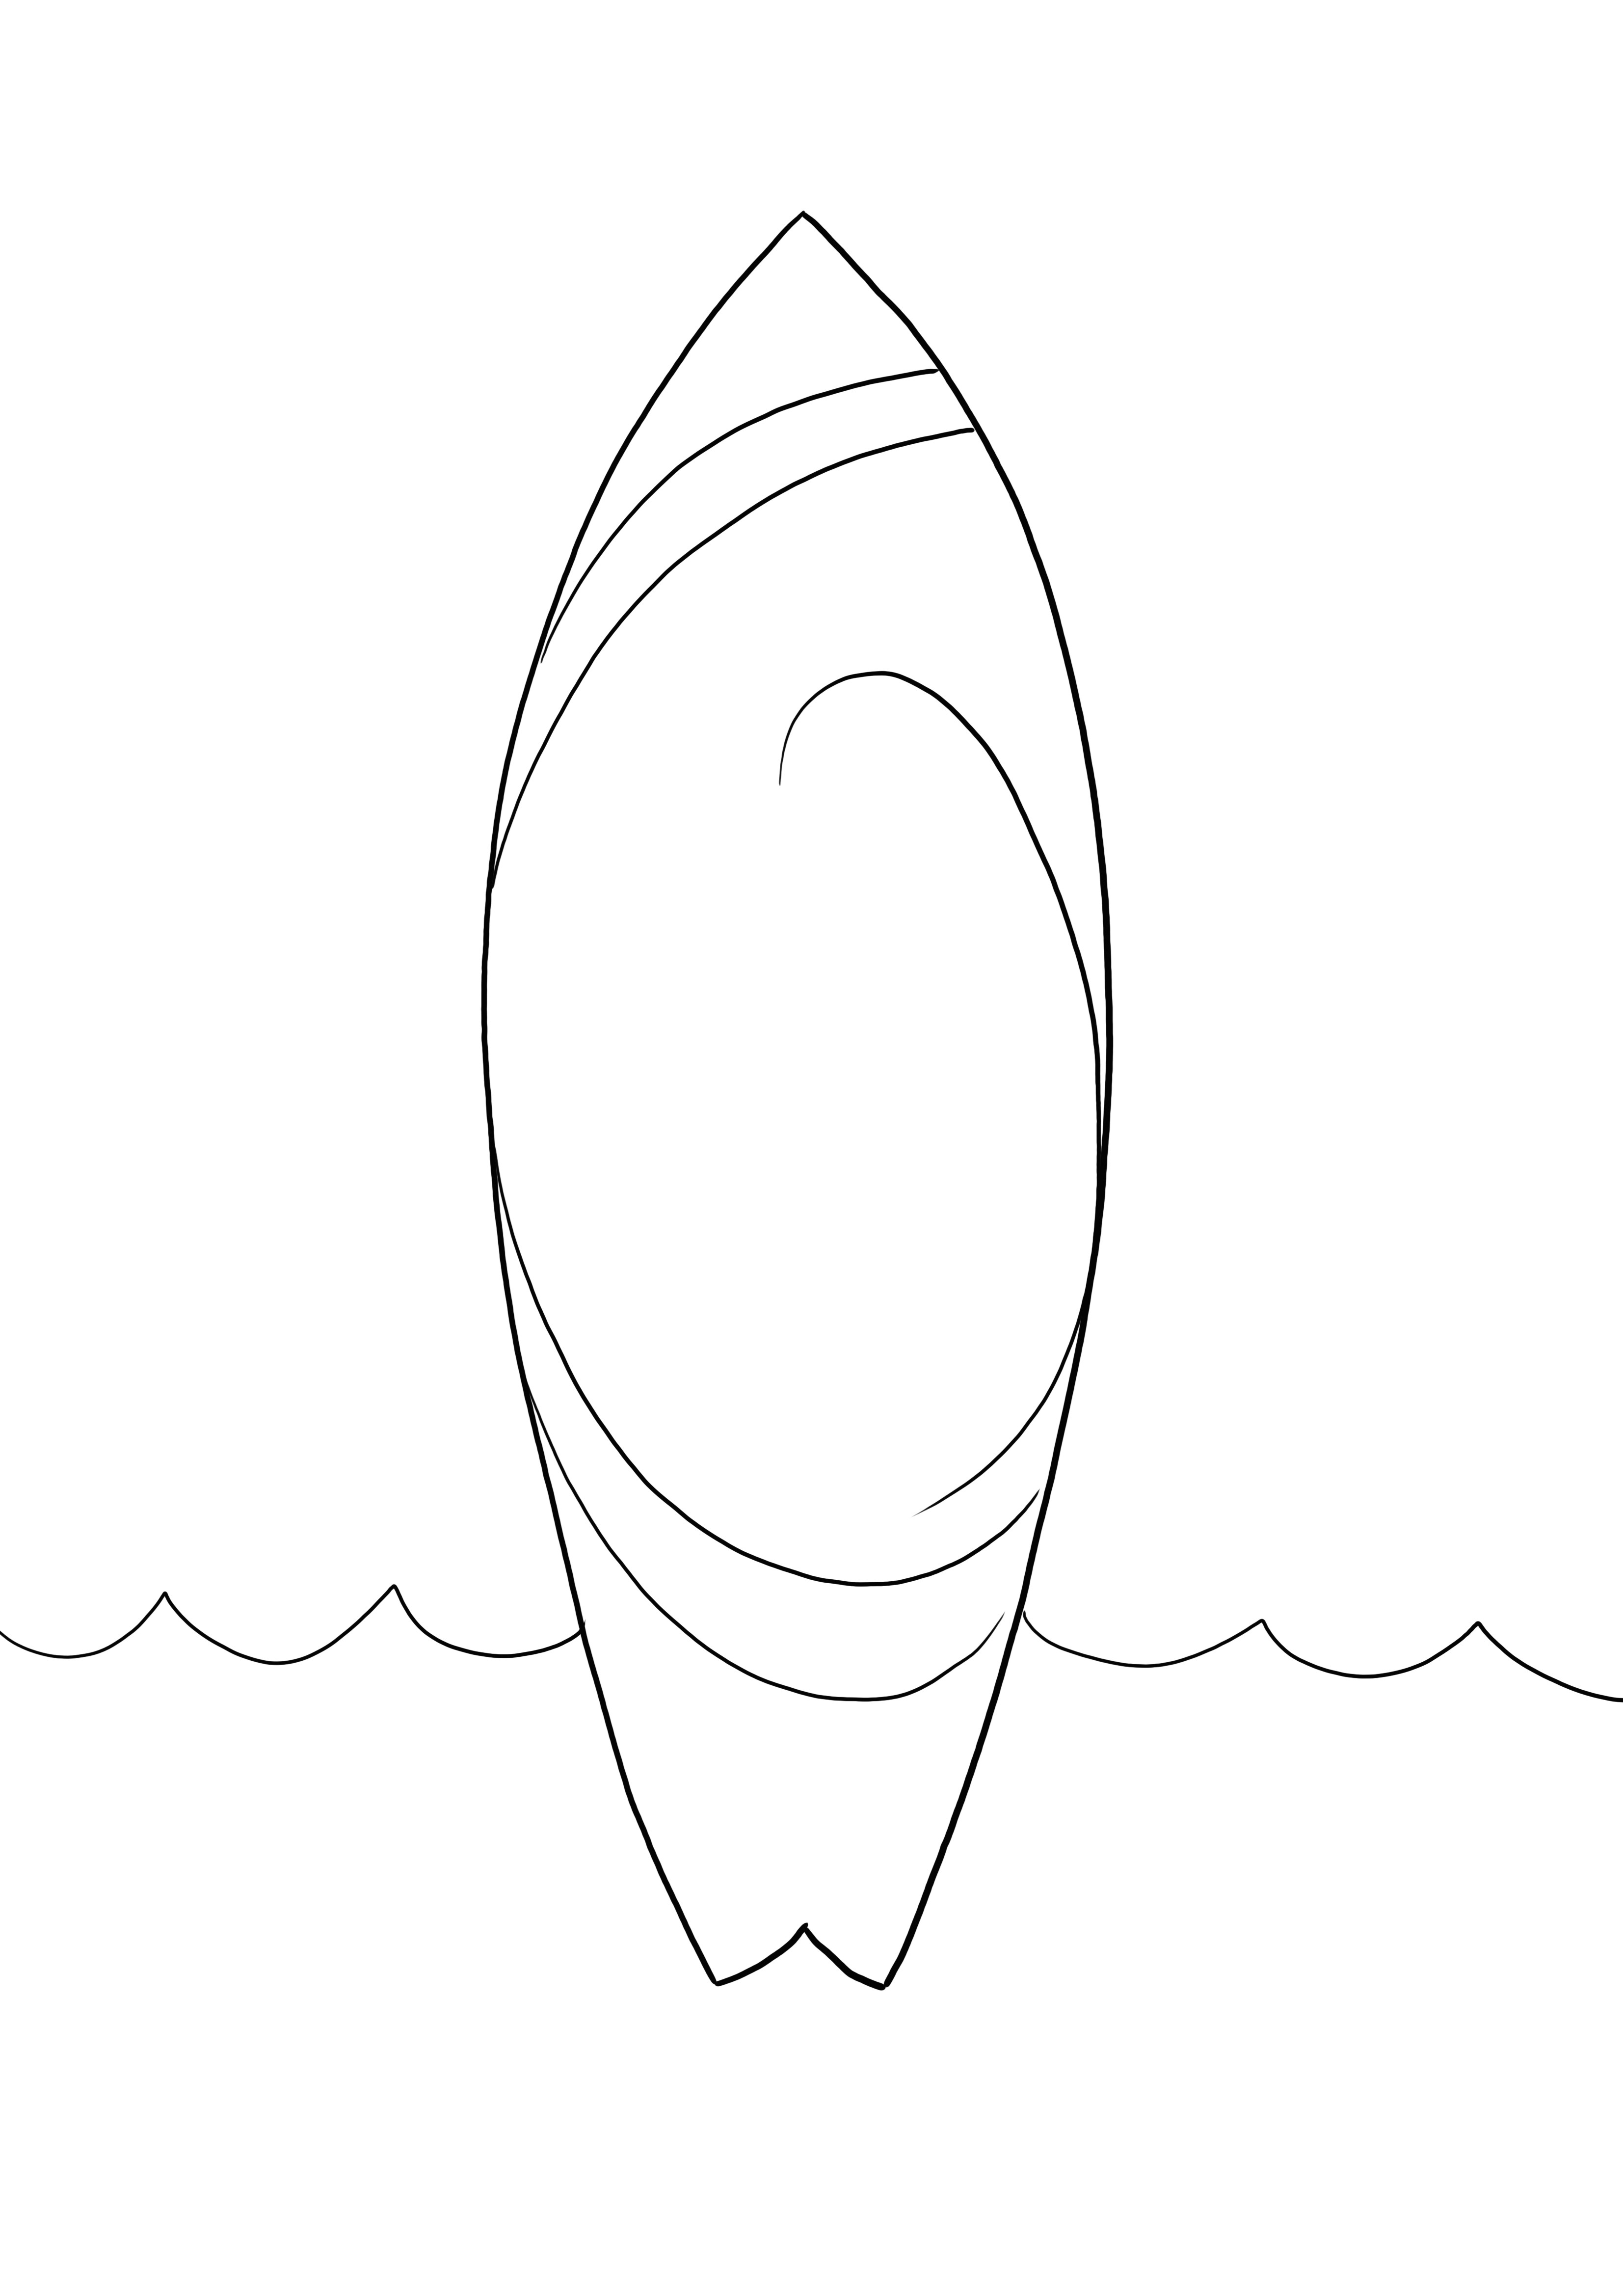 Surfboard coloring image free to print and used to teach about surfing